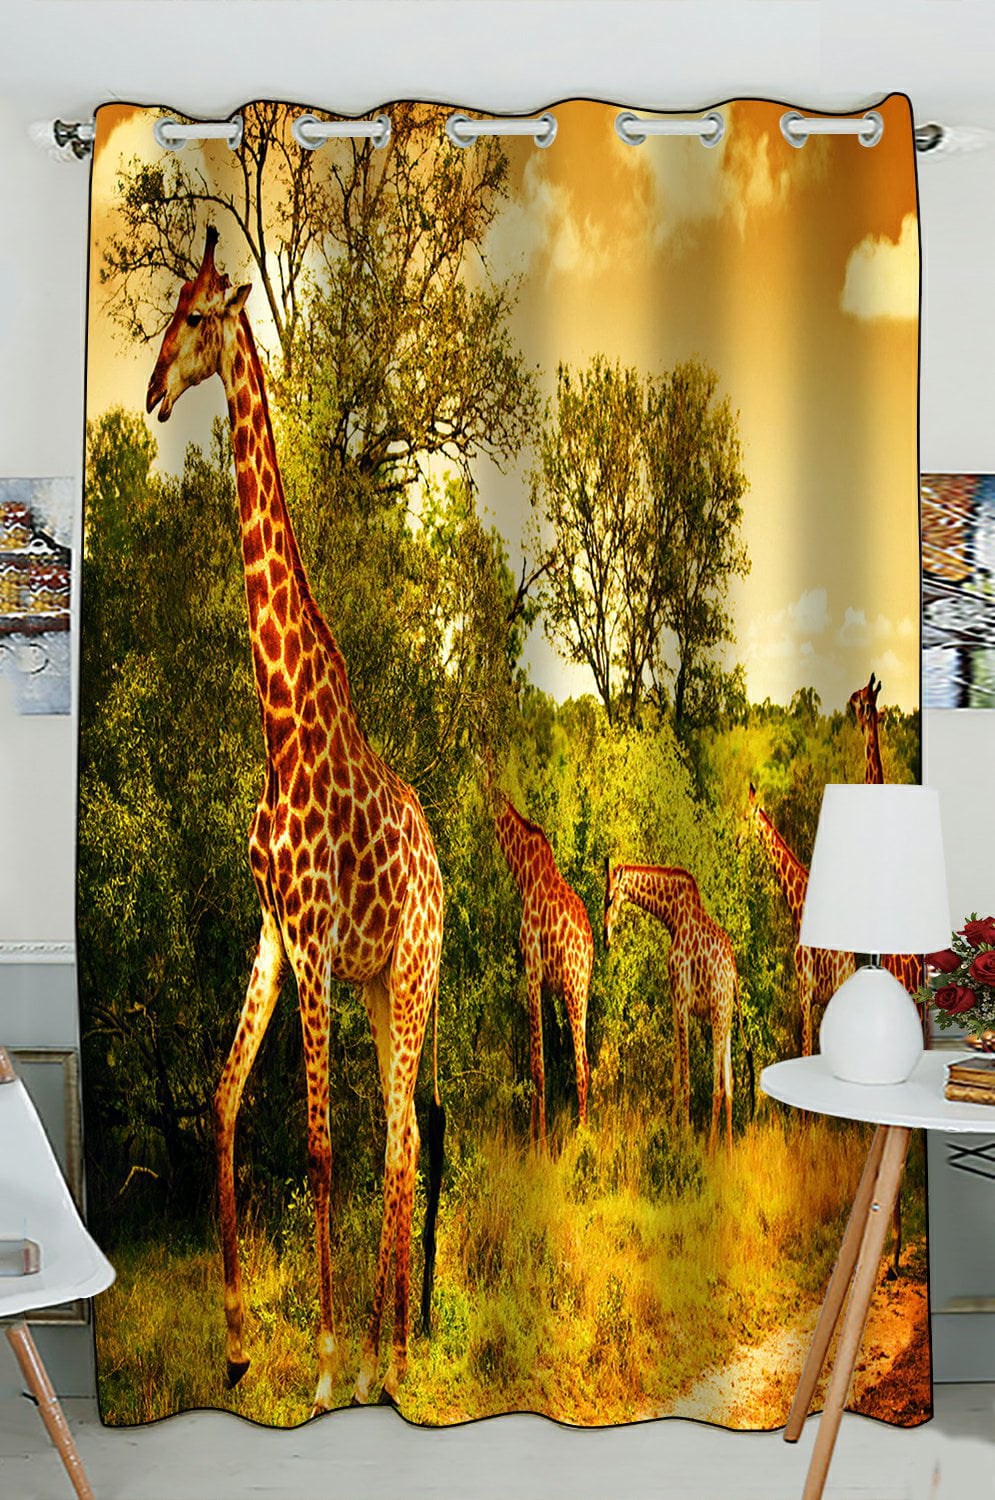 Animal Curtains Giraffe in Wild Forest Window Drapes 2 Panel Set 108x84 Inches 